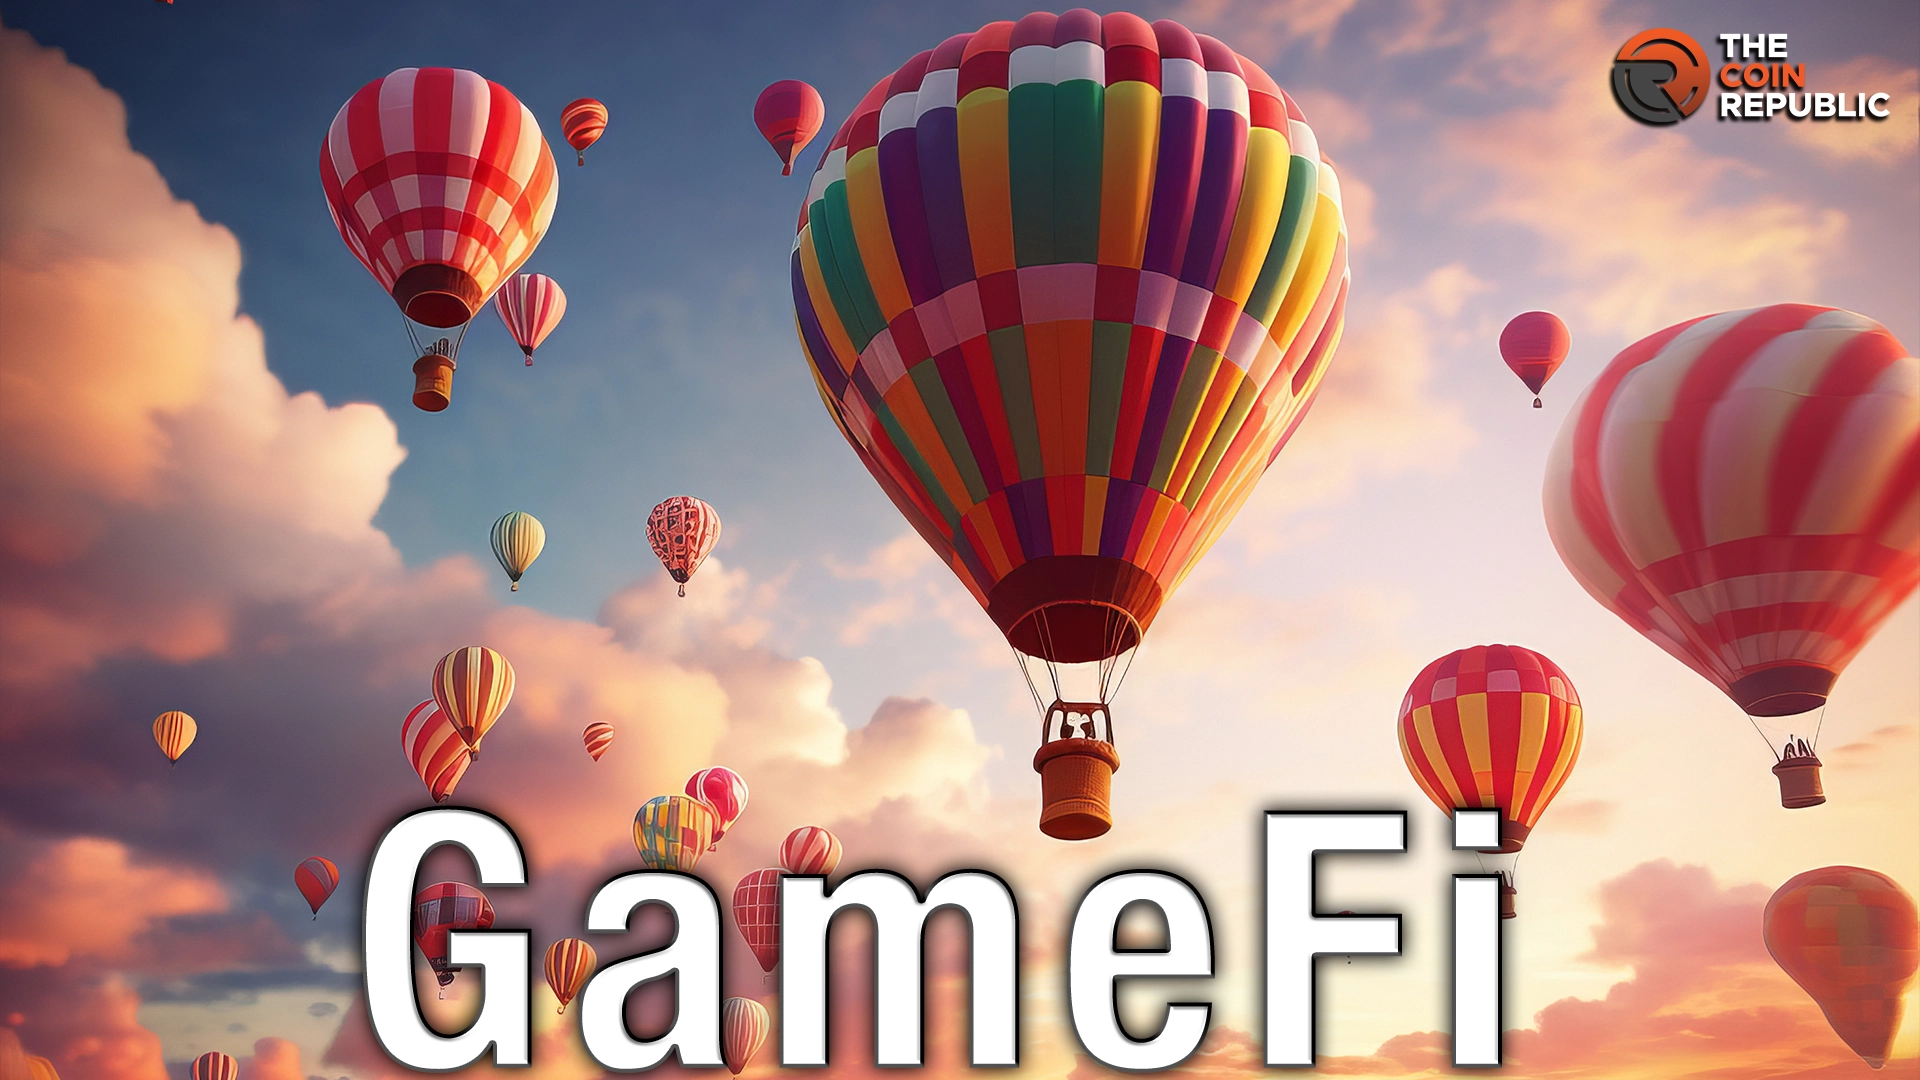 GameFi Airdrops Will Stay but Will Not Save Bad Game: Execs